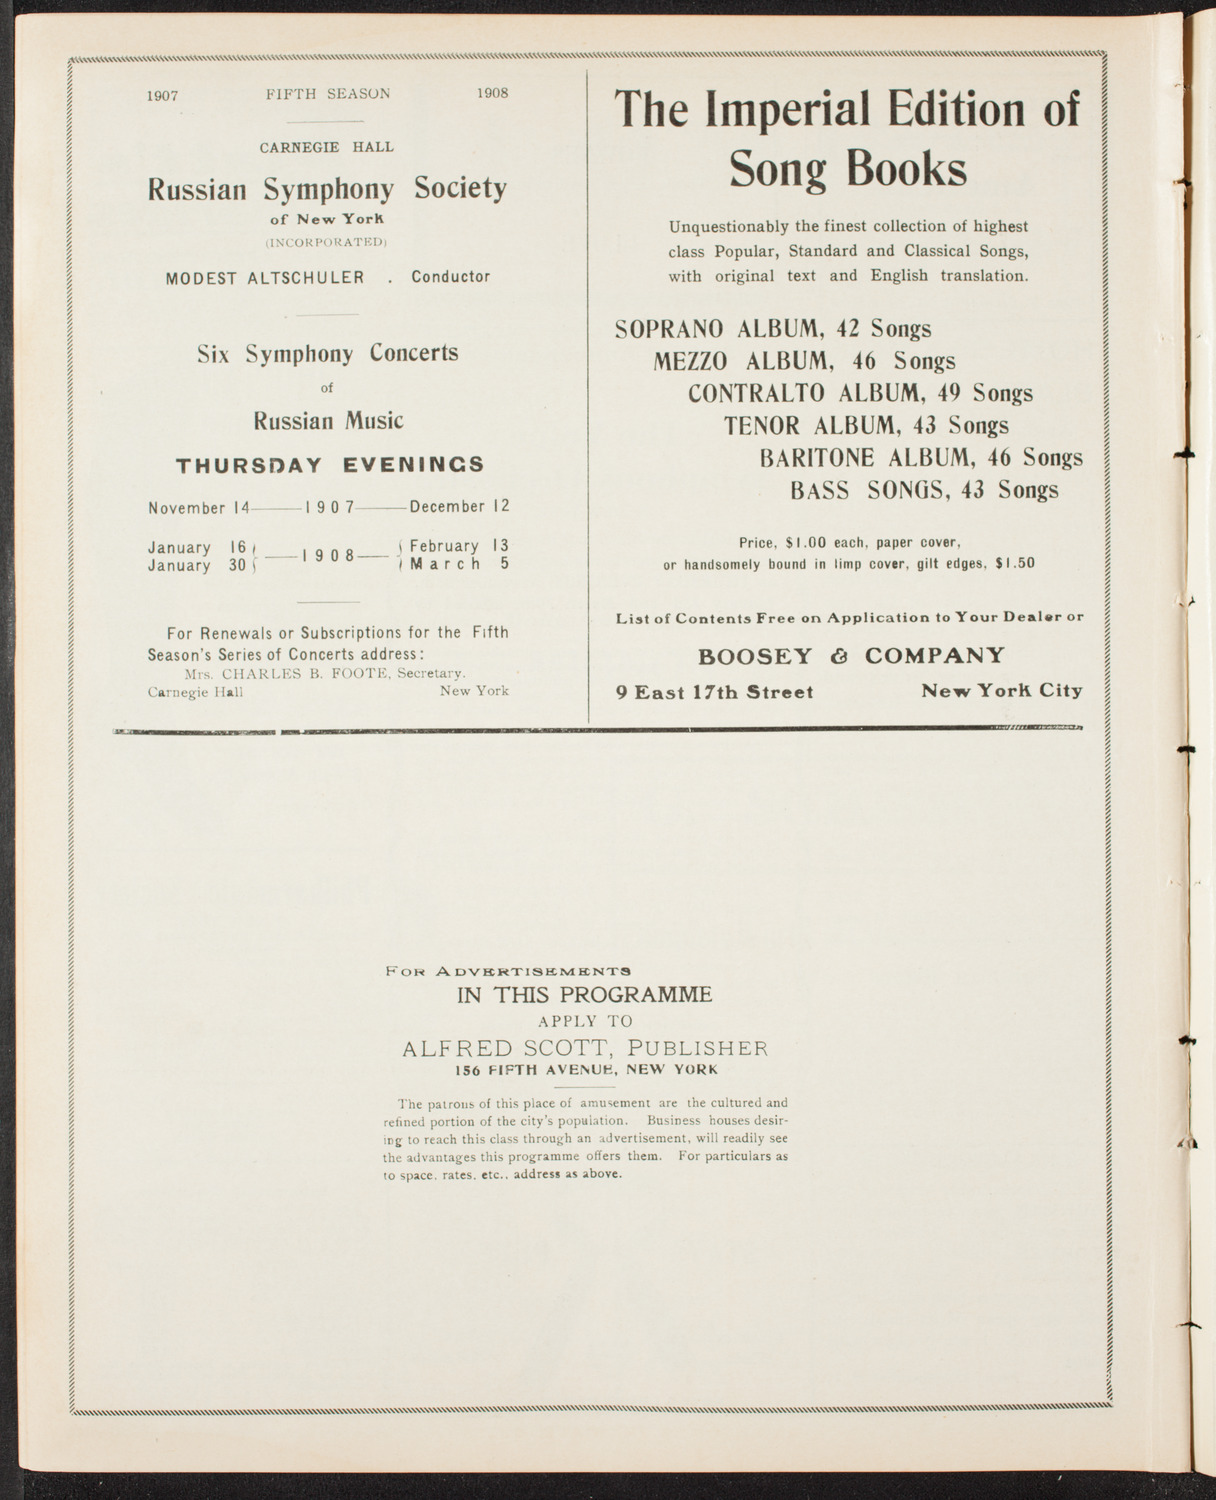 Graduation: College of Pharmacy of the City of New York, May 2, 1907, program page 10